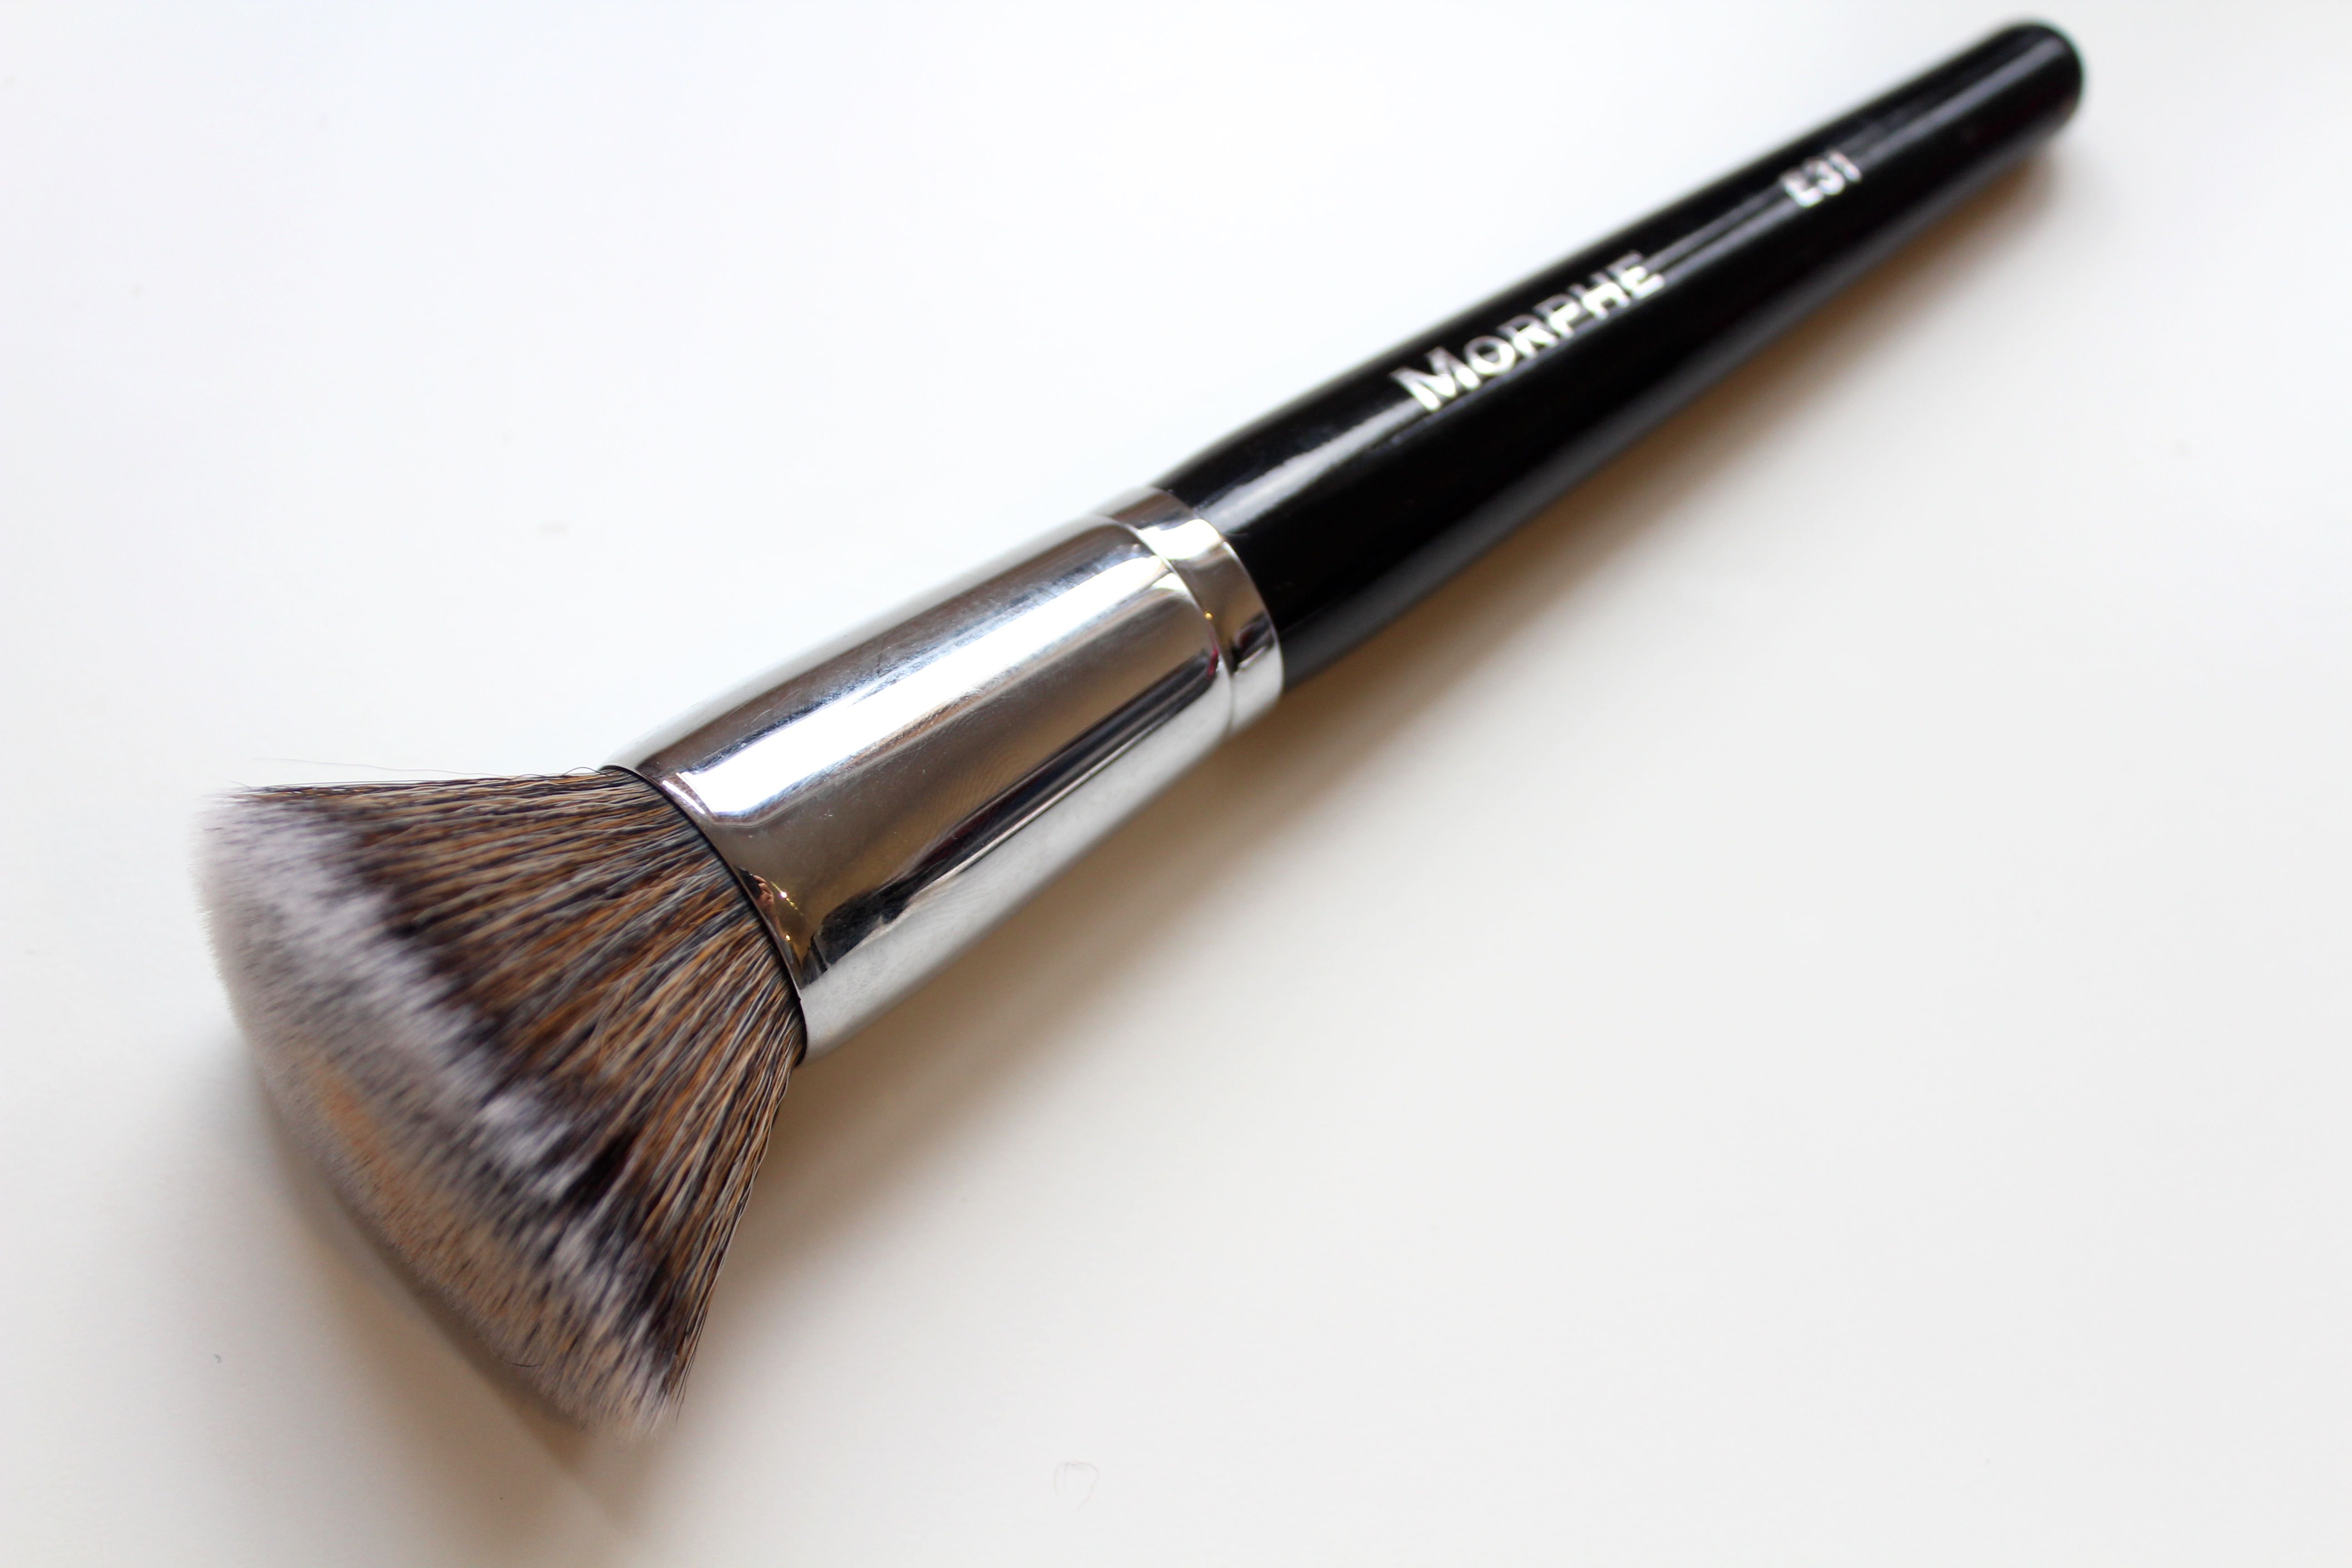 Morphe E31 Deluxe Flat Buffer review by Facemadeup.com